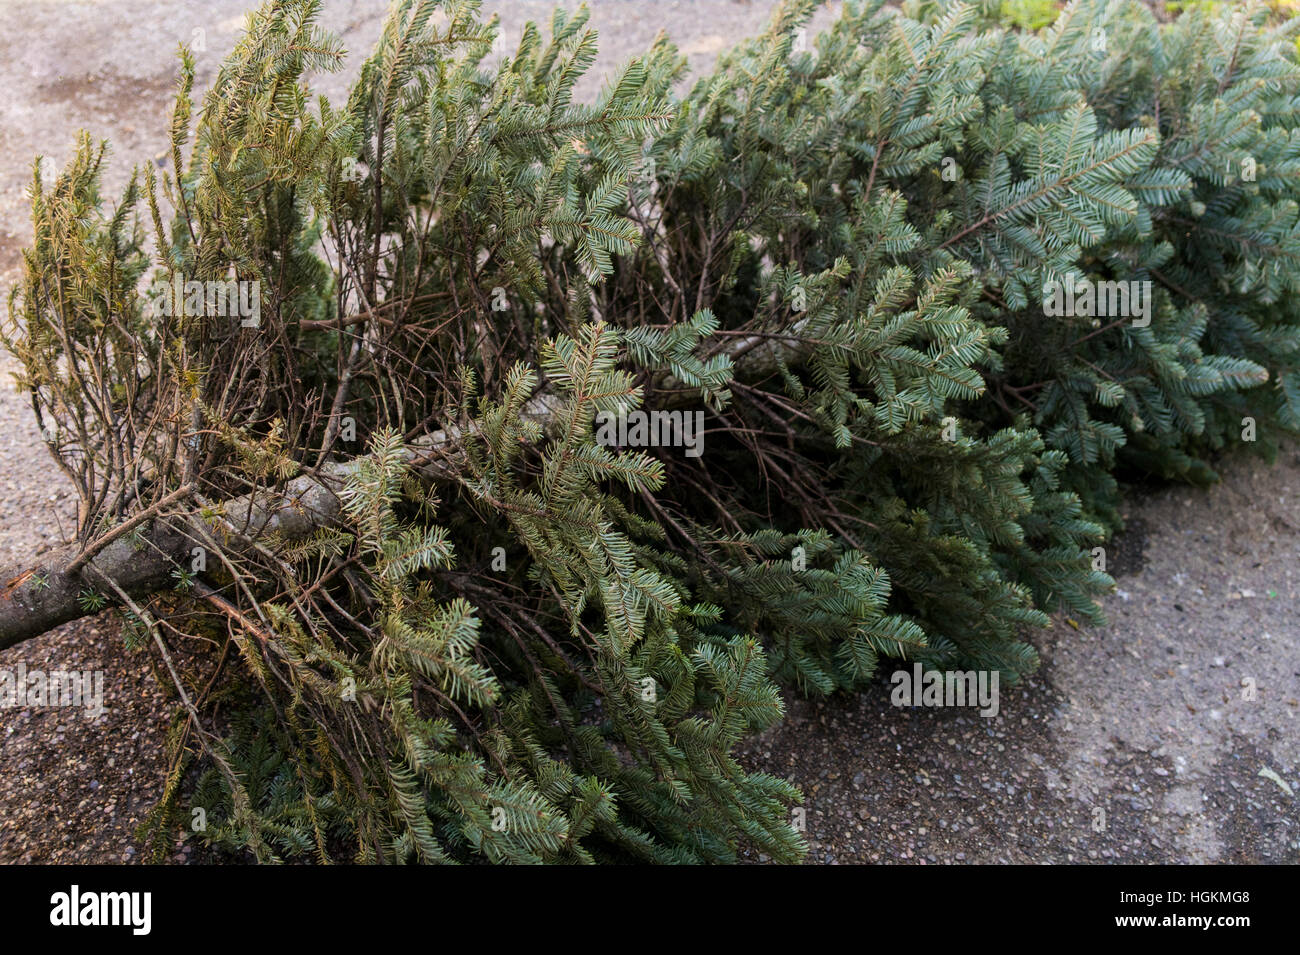 End of Christmas. Old discarded Christmas tree. Stock Photo